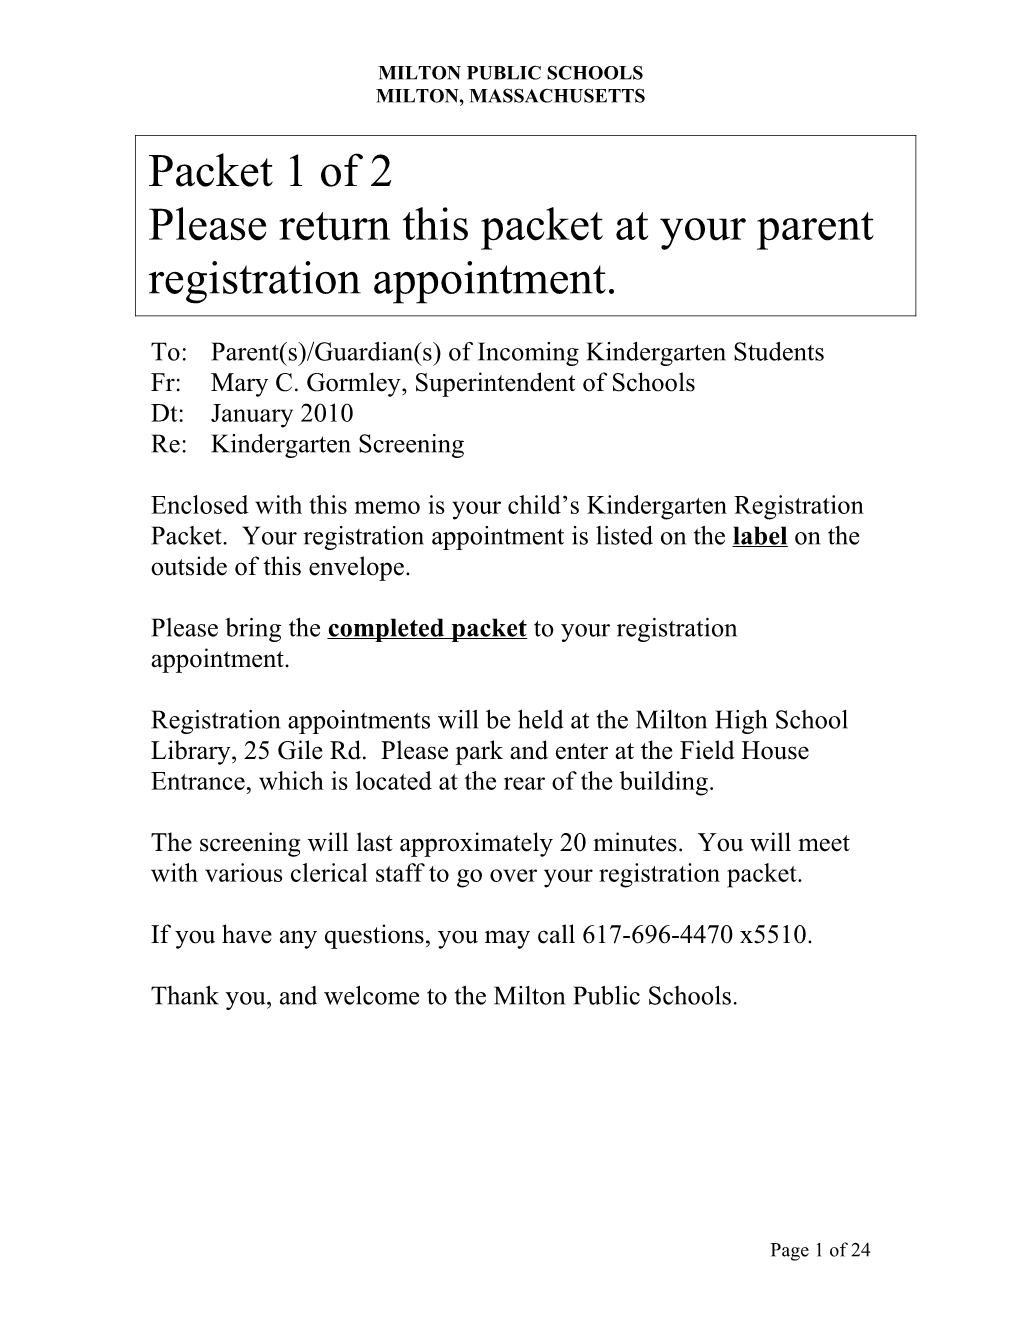 New Student Registration Packet